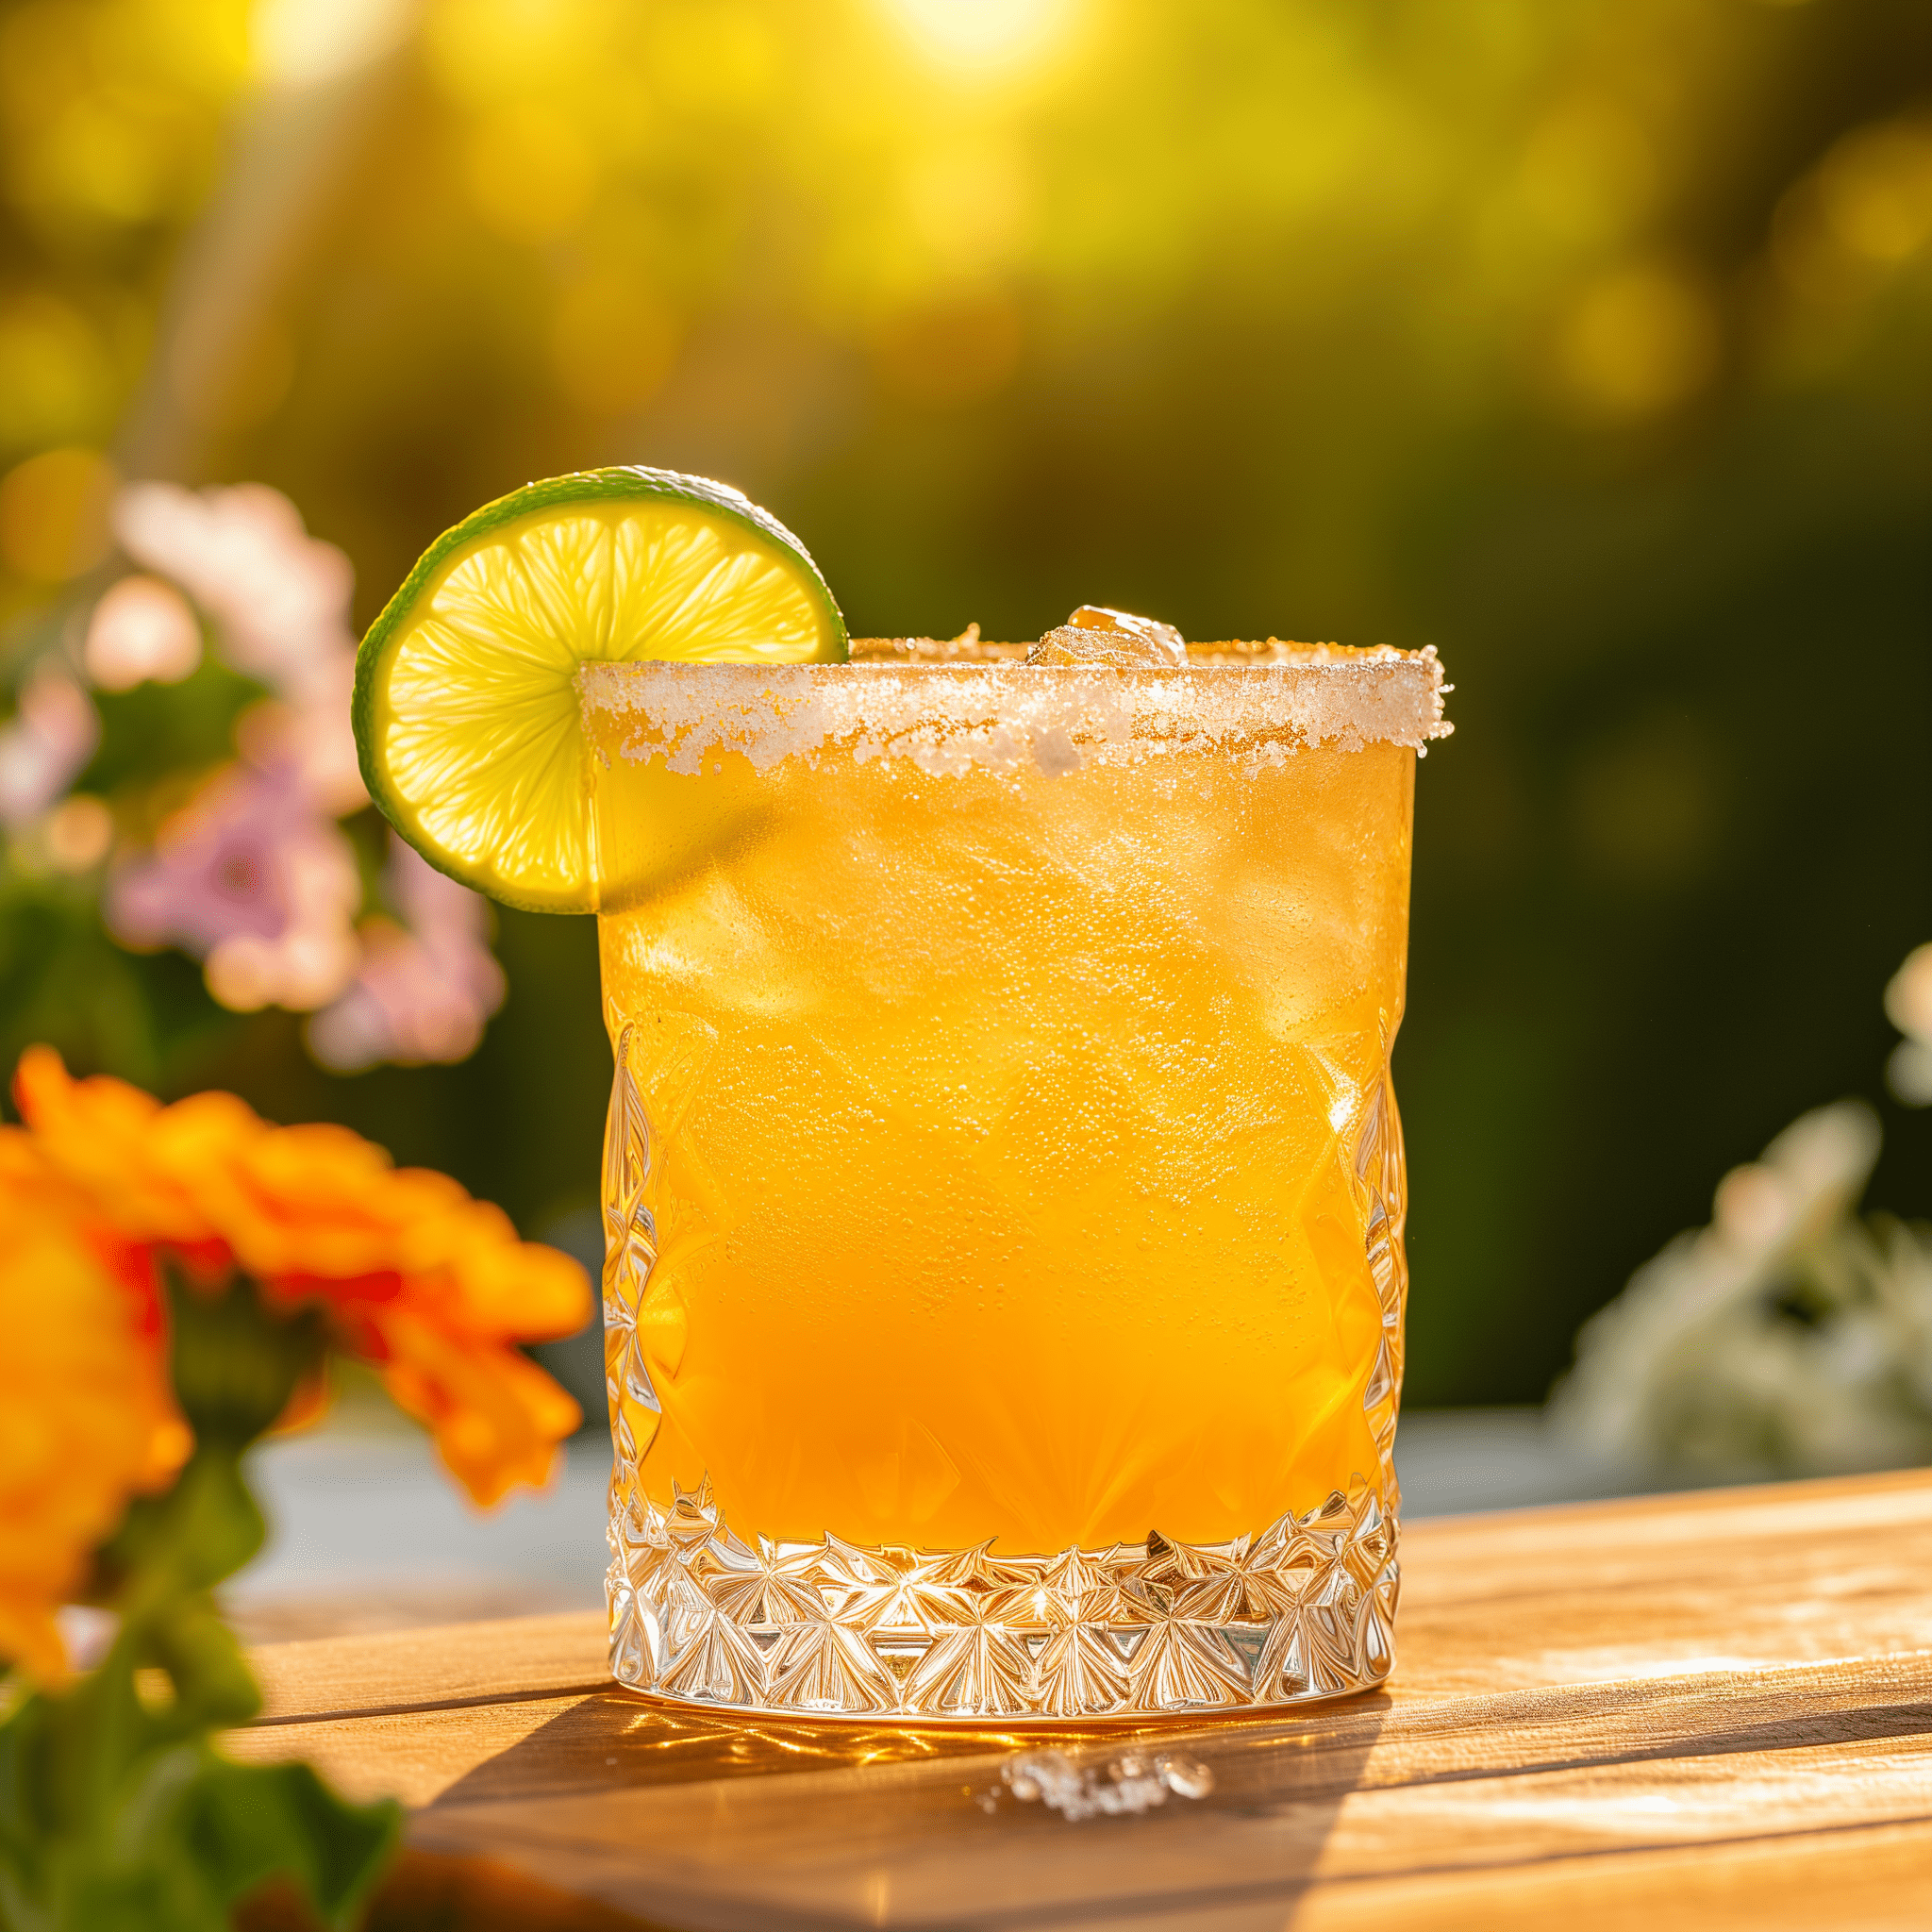 Spring Fling Cocktail Recipe - The Spring Fling is a harmonious blend of sweet and tart flavors. The tequila provides a smooth, agave-based canvas, while the orange and pineapple juices add a fruity and slightly acidic dimension. The triple sec offers a subtle orange zest that complements the sweetness, and the lime wheel garnish adds a final zesty touch.